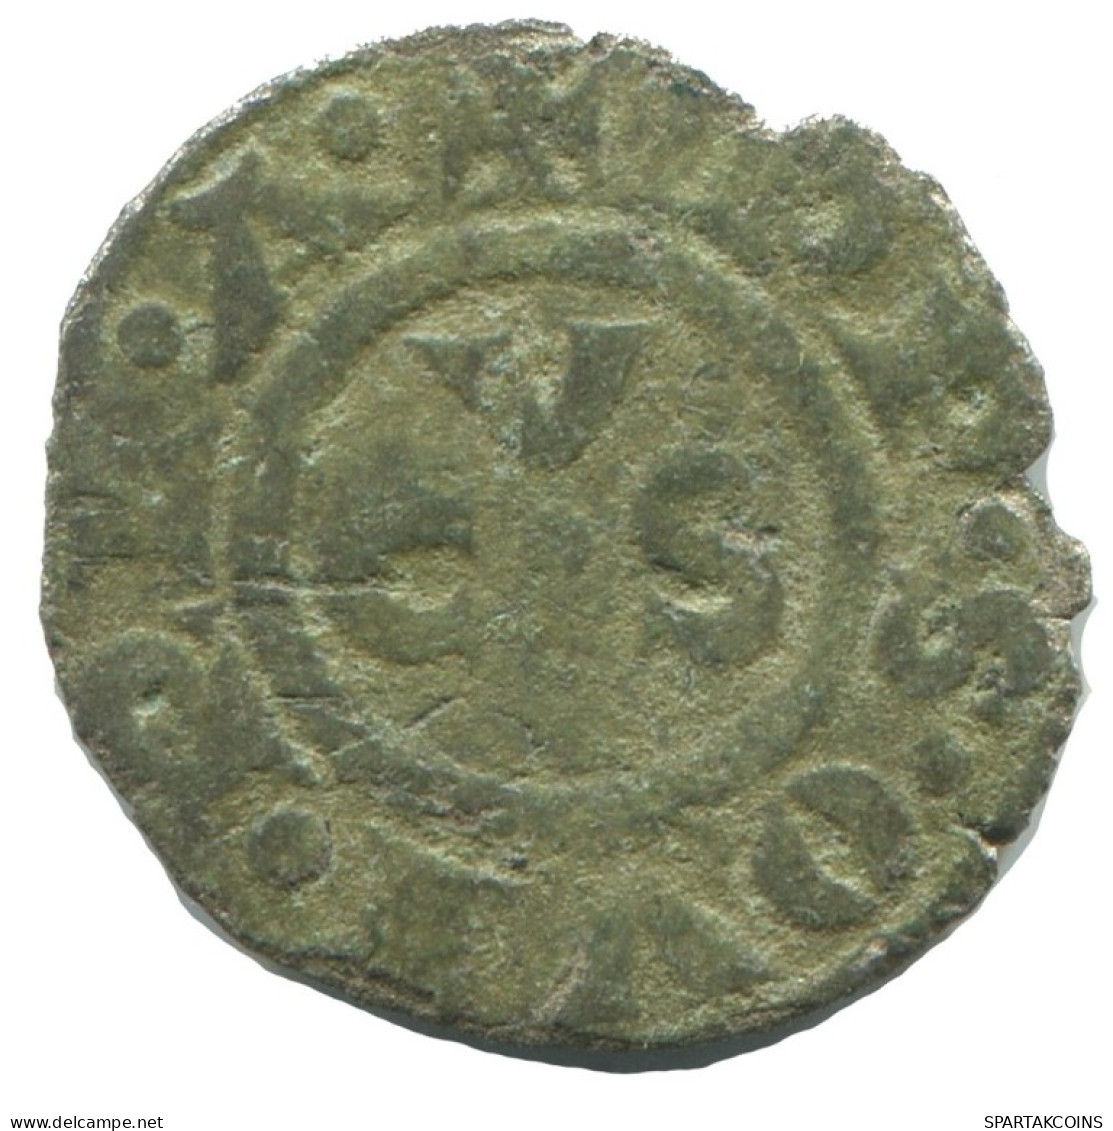 CRUSADER CROSS Authentic Original MEDIEVAL EUROPEAN Coin 0.5g/15mm #AC131.8.E.A - Andere - Europa